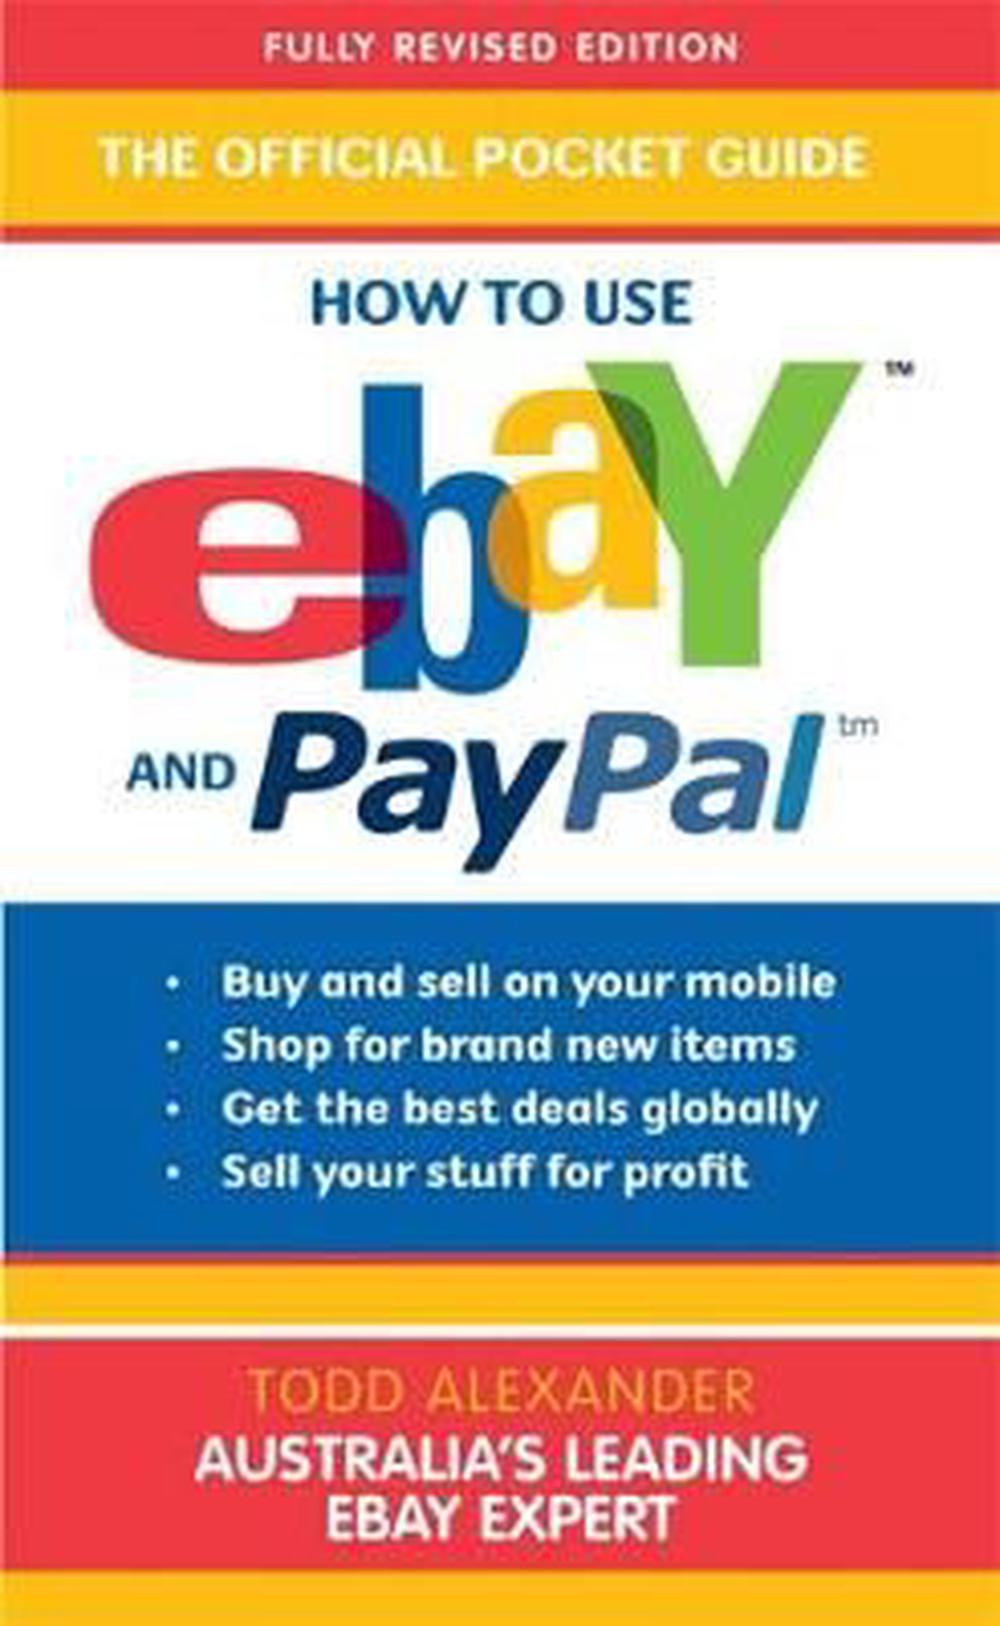 how to use paypal on ebay as a seller